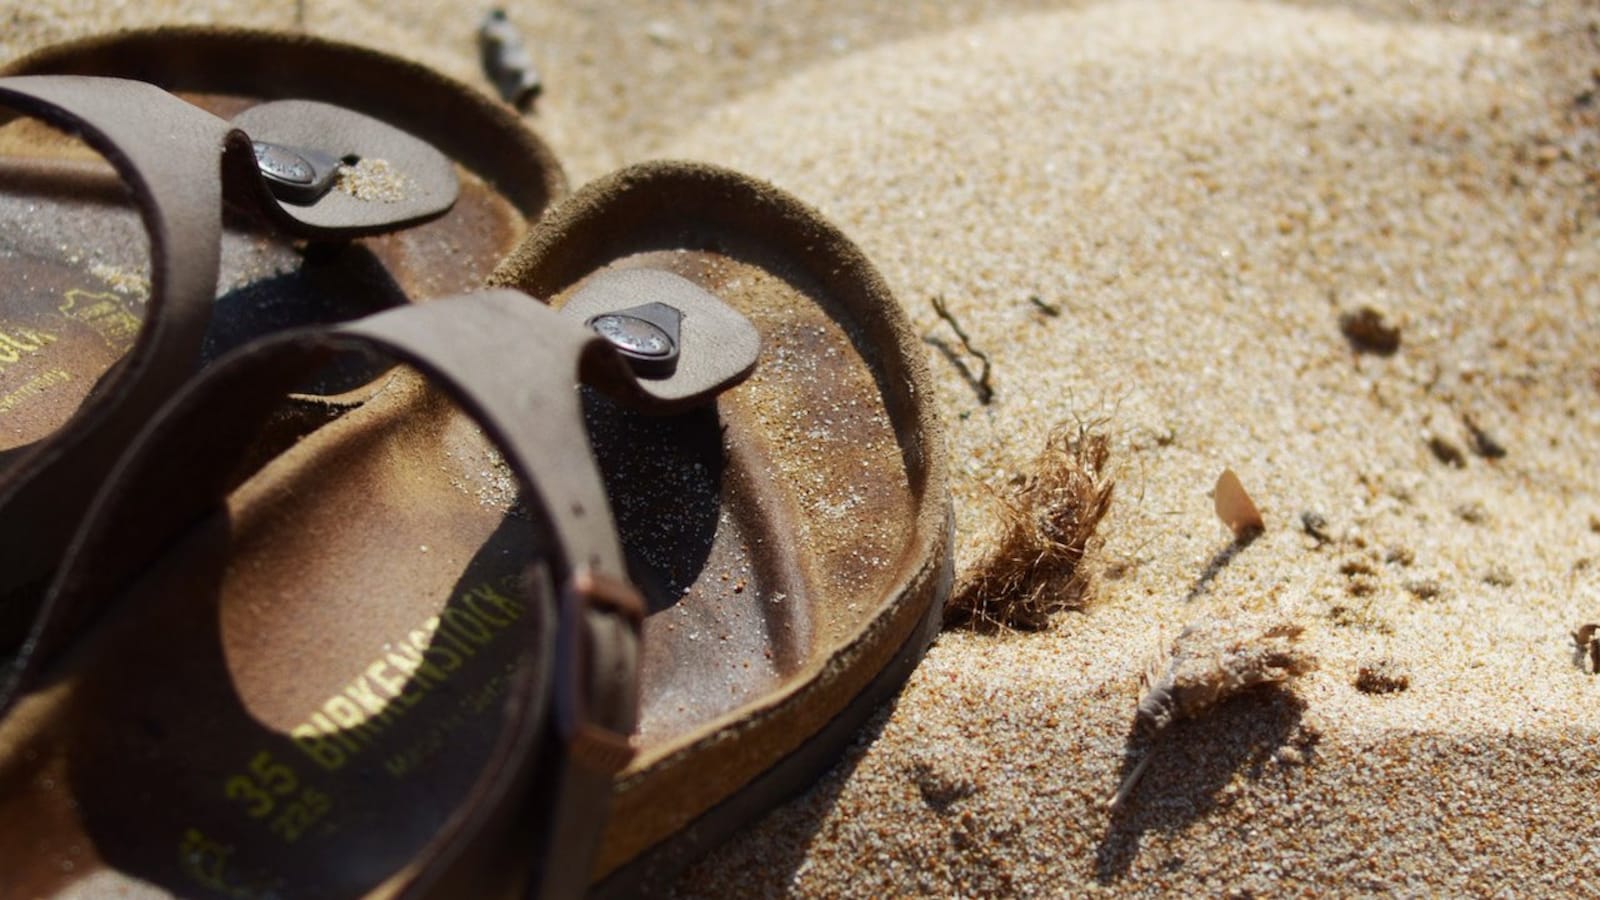 Birkenstock To The Beach Sandals: Photos, Prices, Where to Buy